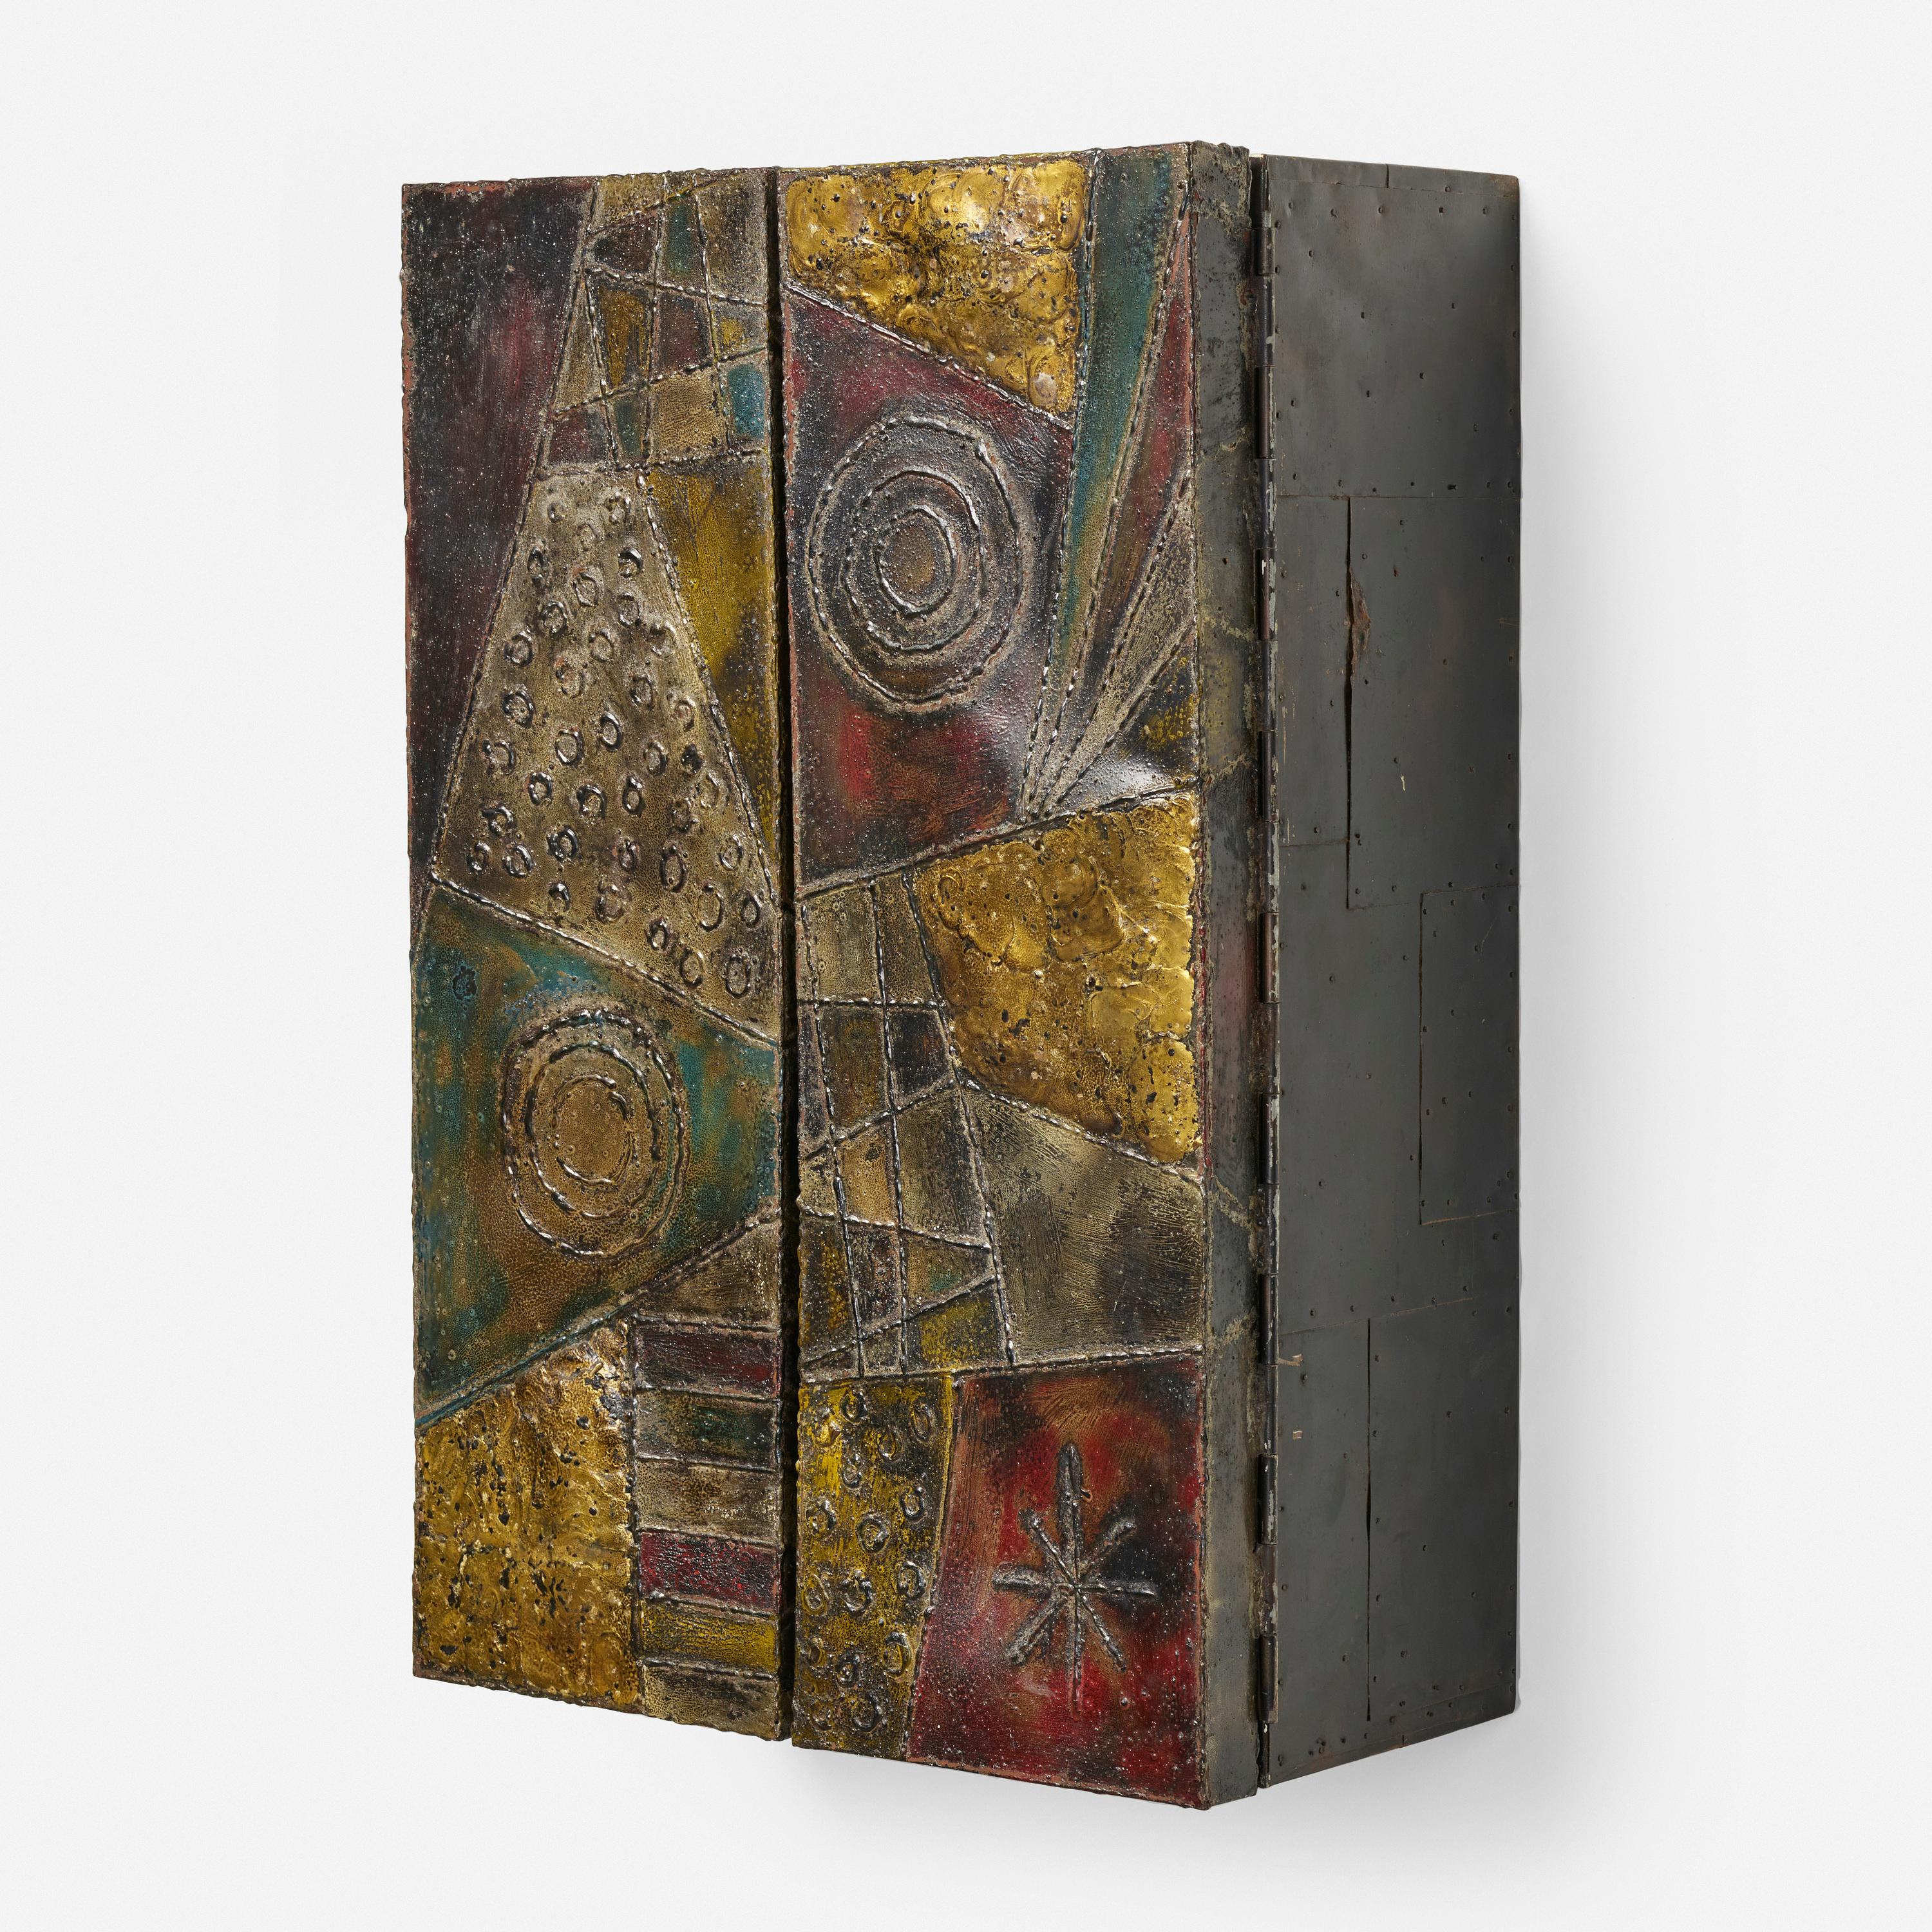 Polychrome Welded and patinated steel wall cabinet by Paul Evans for Directional. One shelf included inside.